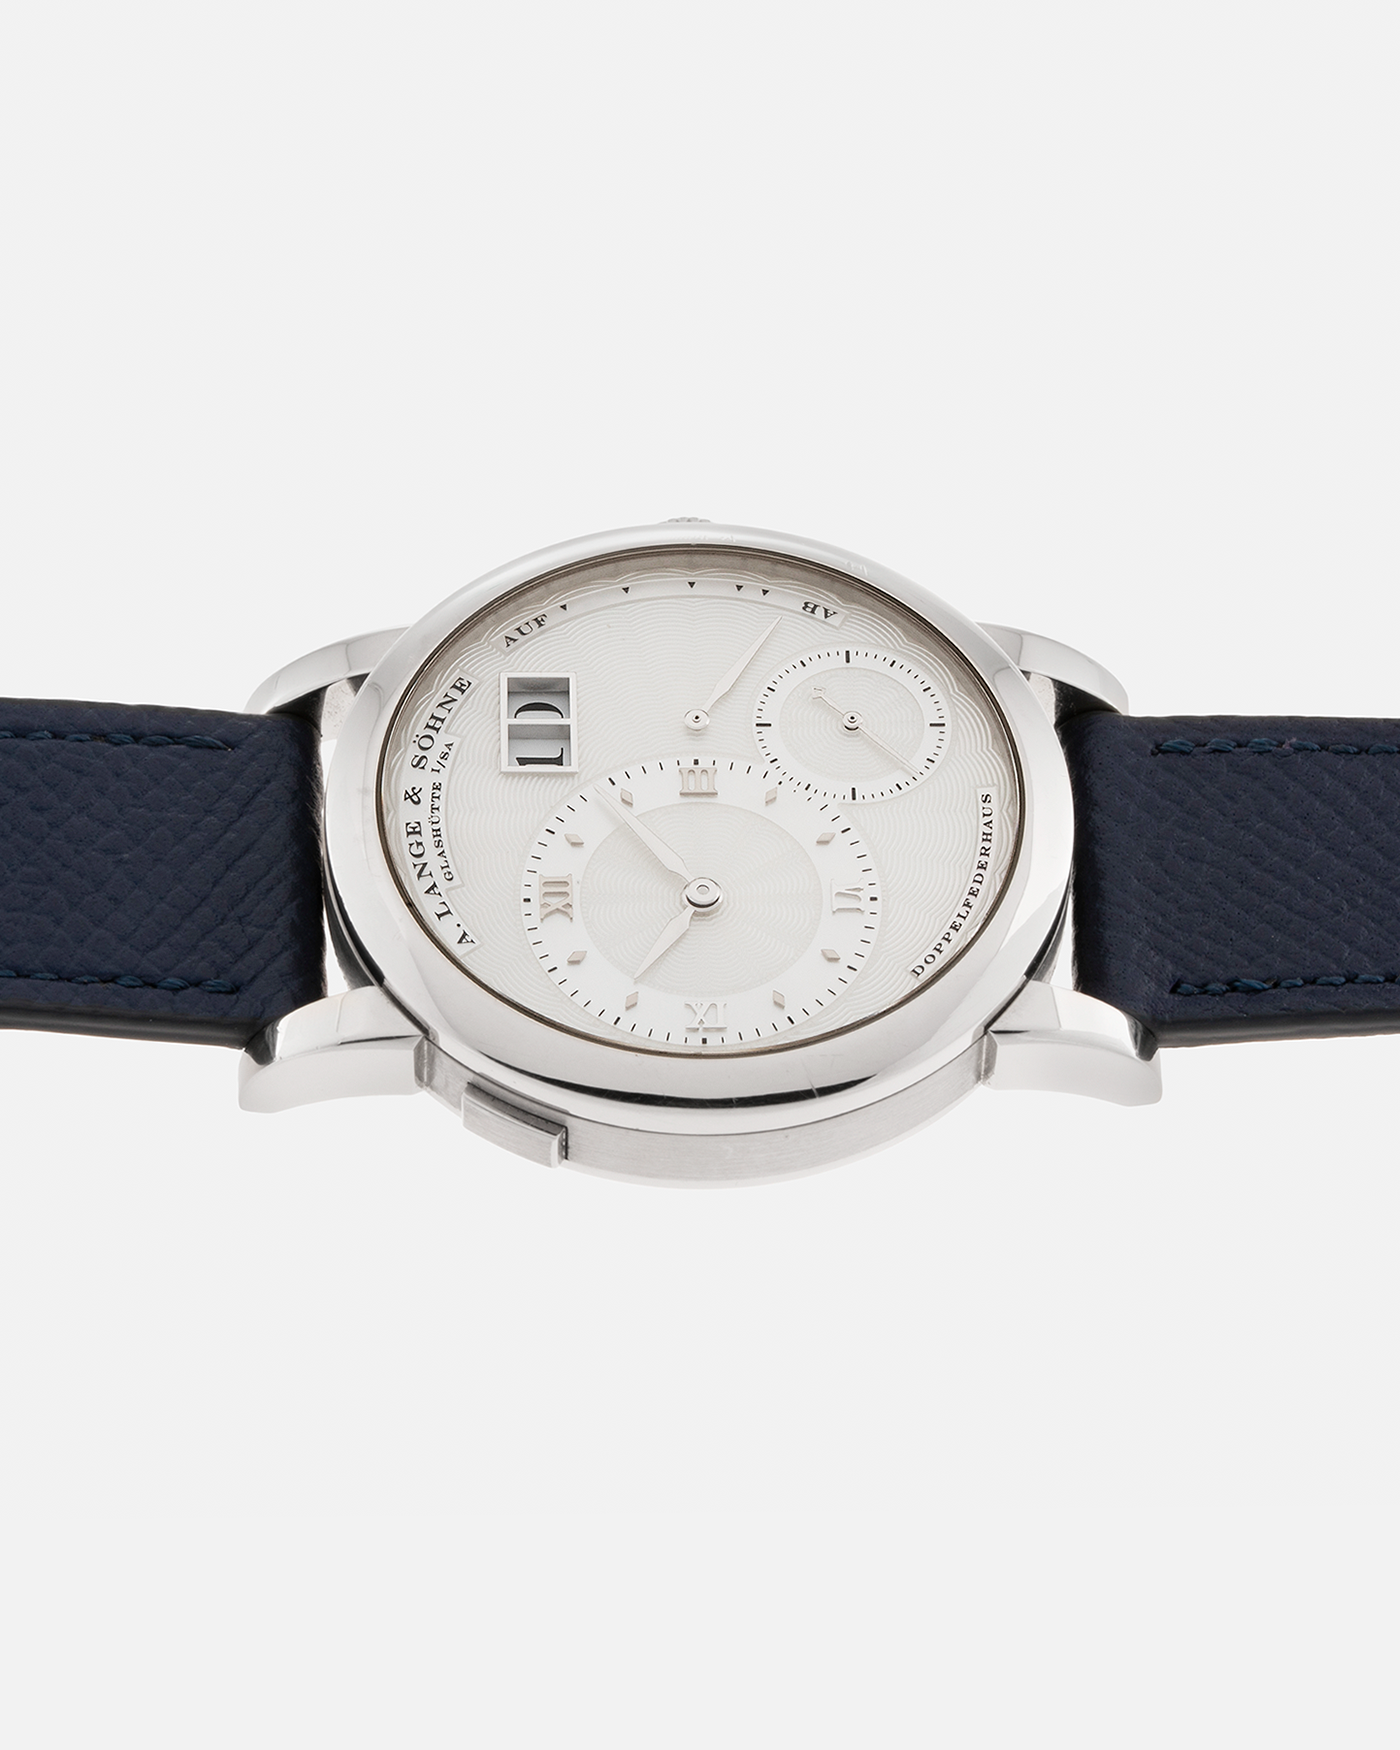 Brand: A. Lange & Söhne Year: 2000’s Model: Lange 1 Soirée Reference Number: 110.030 Material: 18-carat White Gold Movement: A. Lange & Söhne Cal. L901.5, Manual Winding Case Dimensions: 38.5mm x 9.8mm Lug Width: 20mm Strap: Nostime Navy Grained Calf Leather Strap with Signed 18-Carat White Gold Tang Buckle